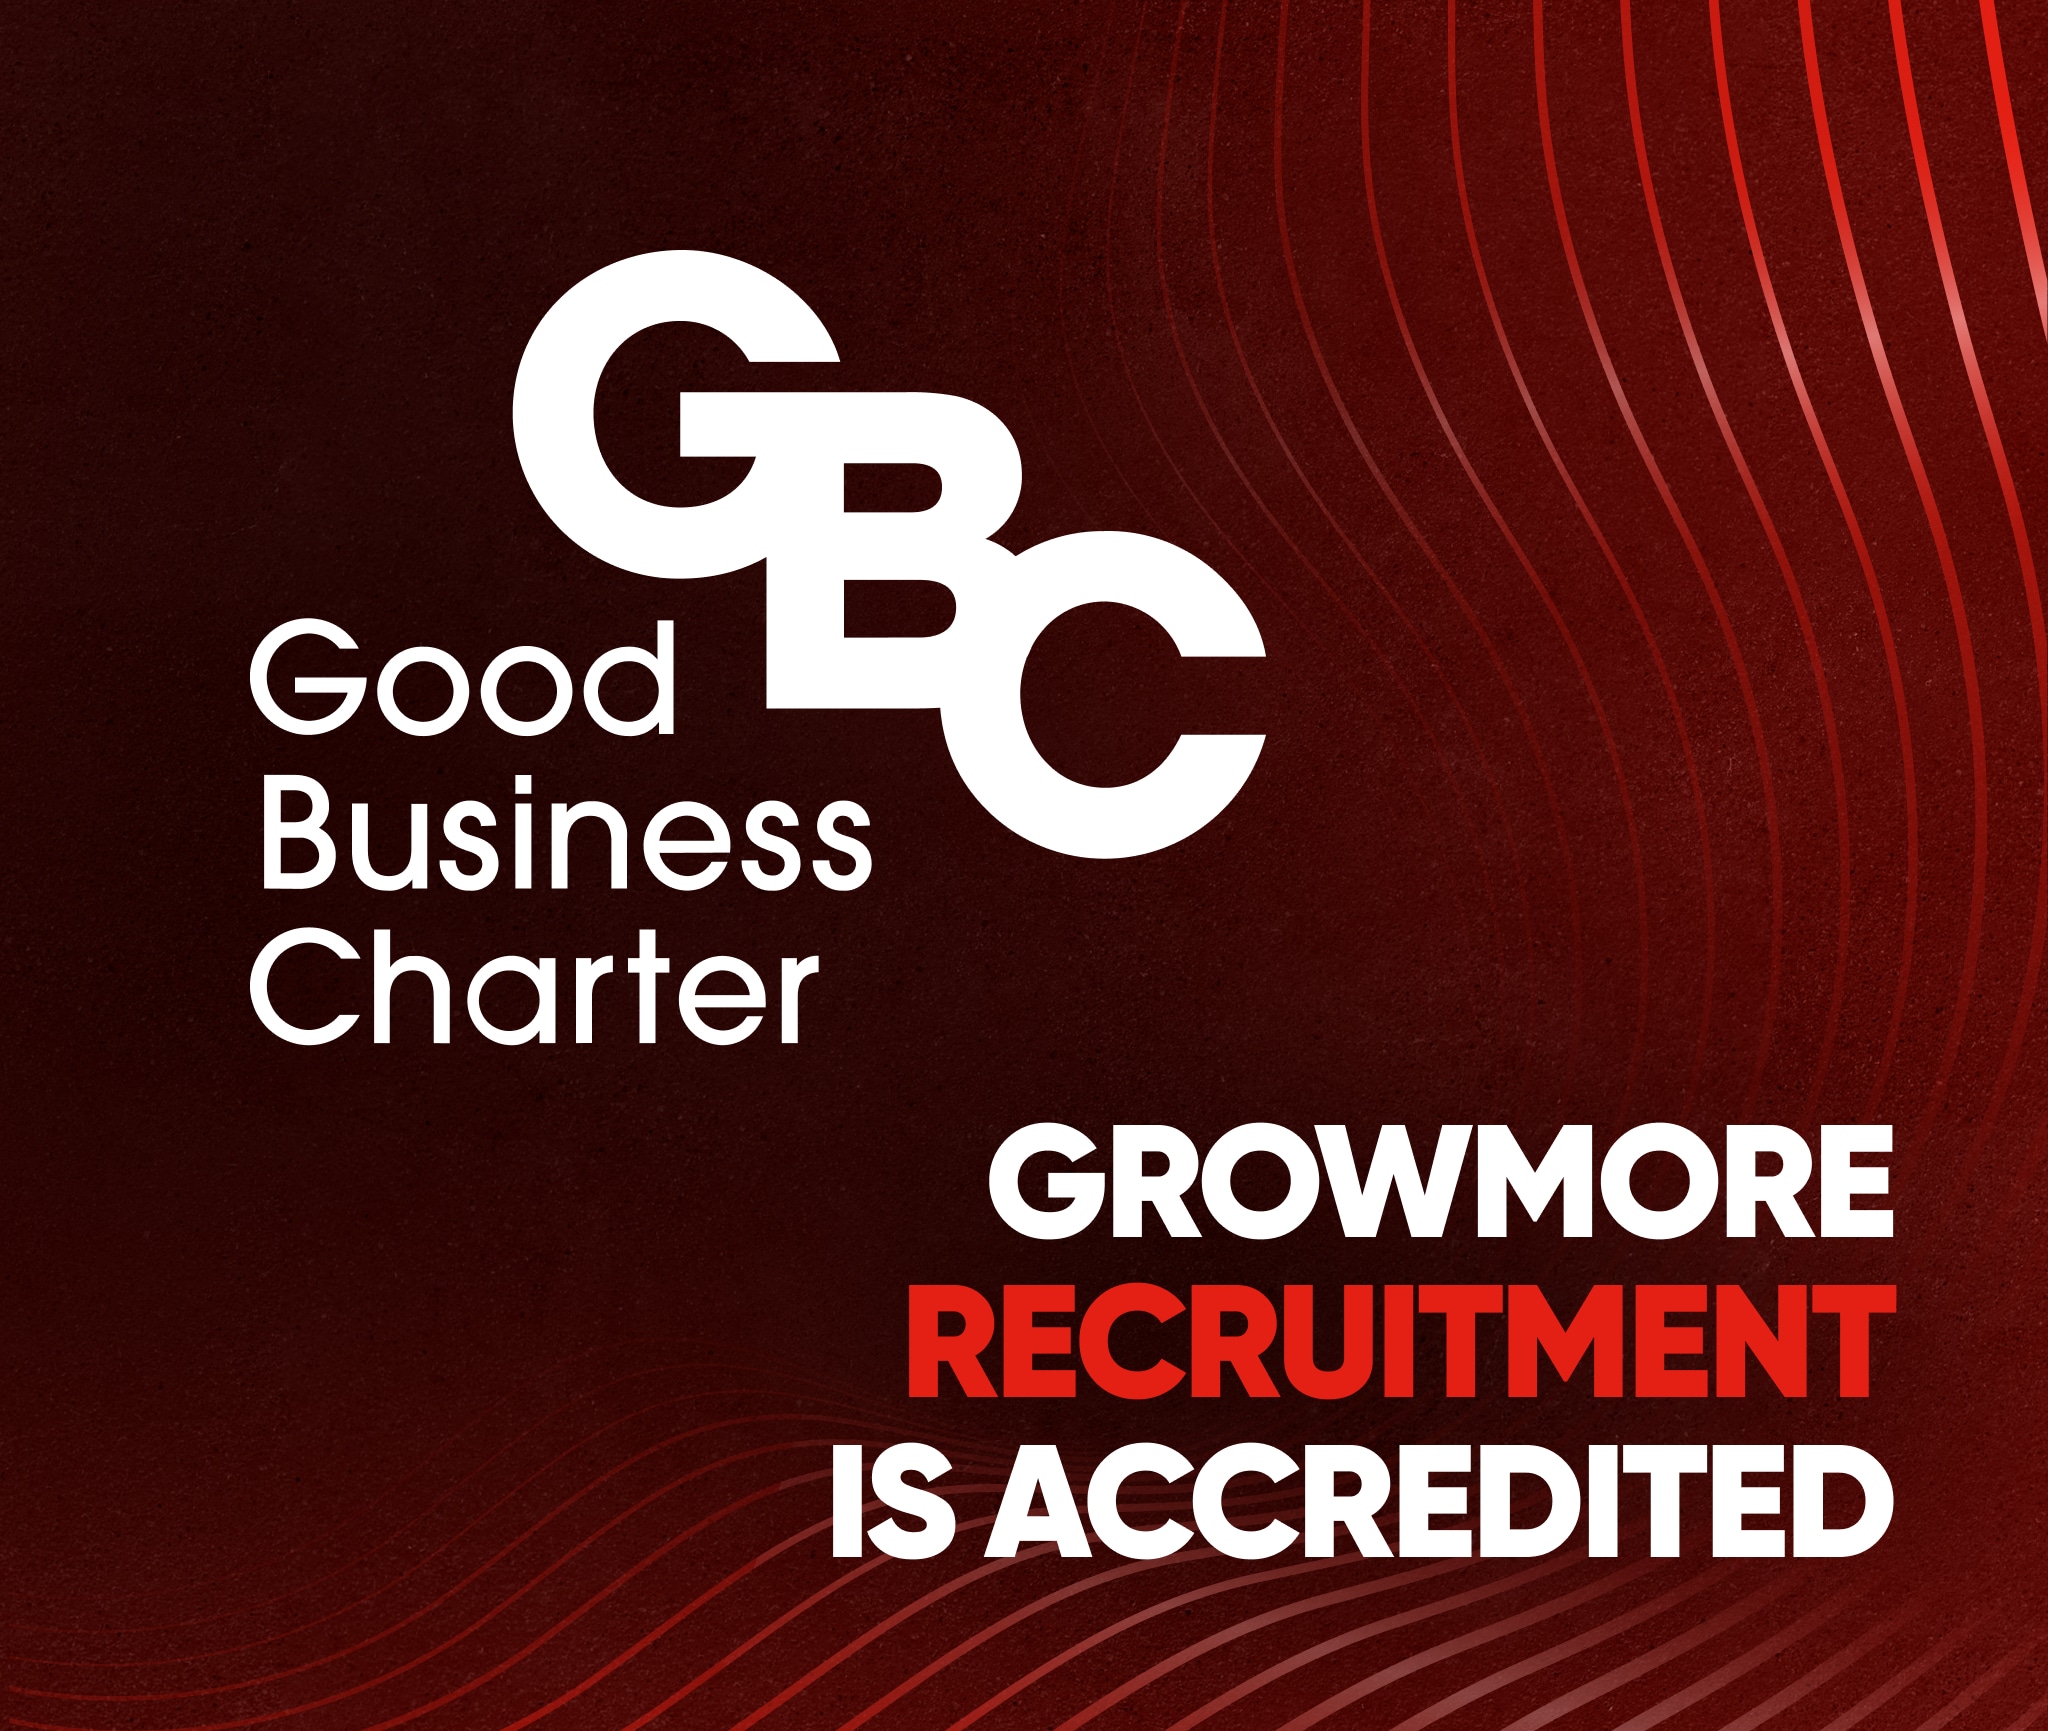 GrowMore Recruitment is Accredited